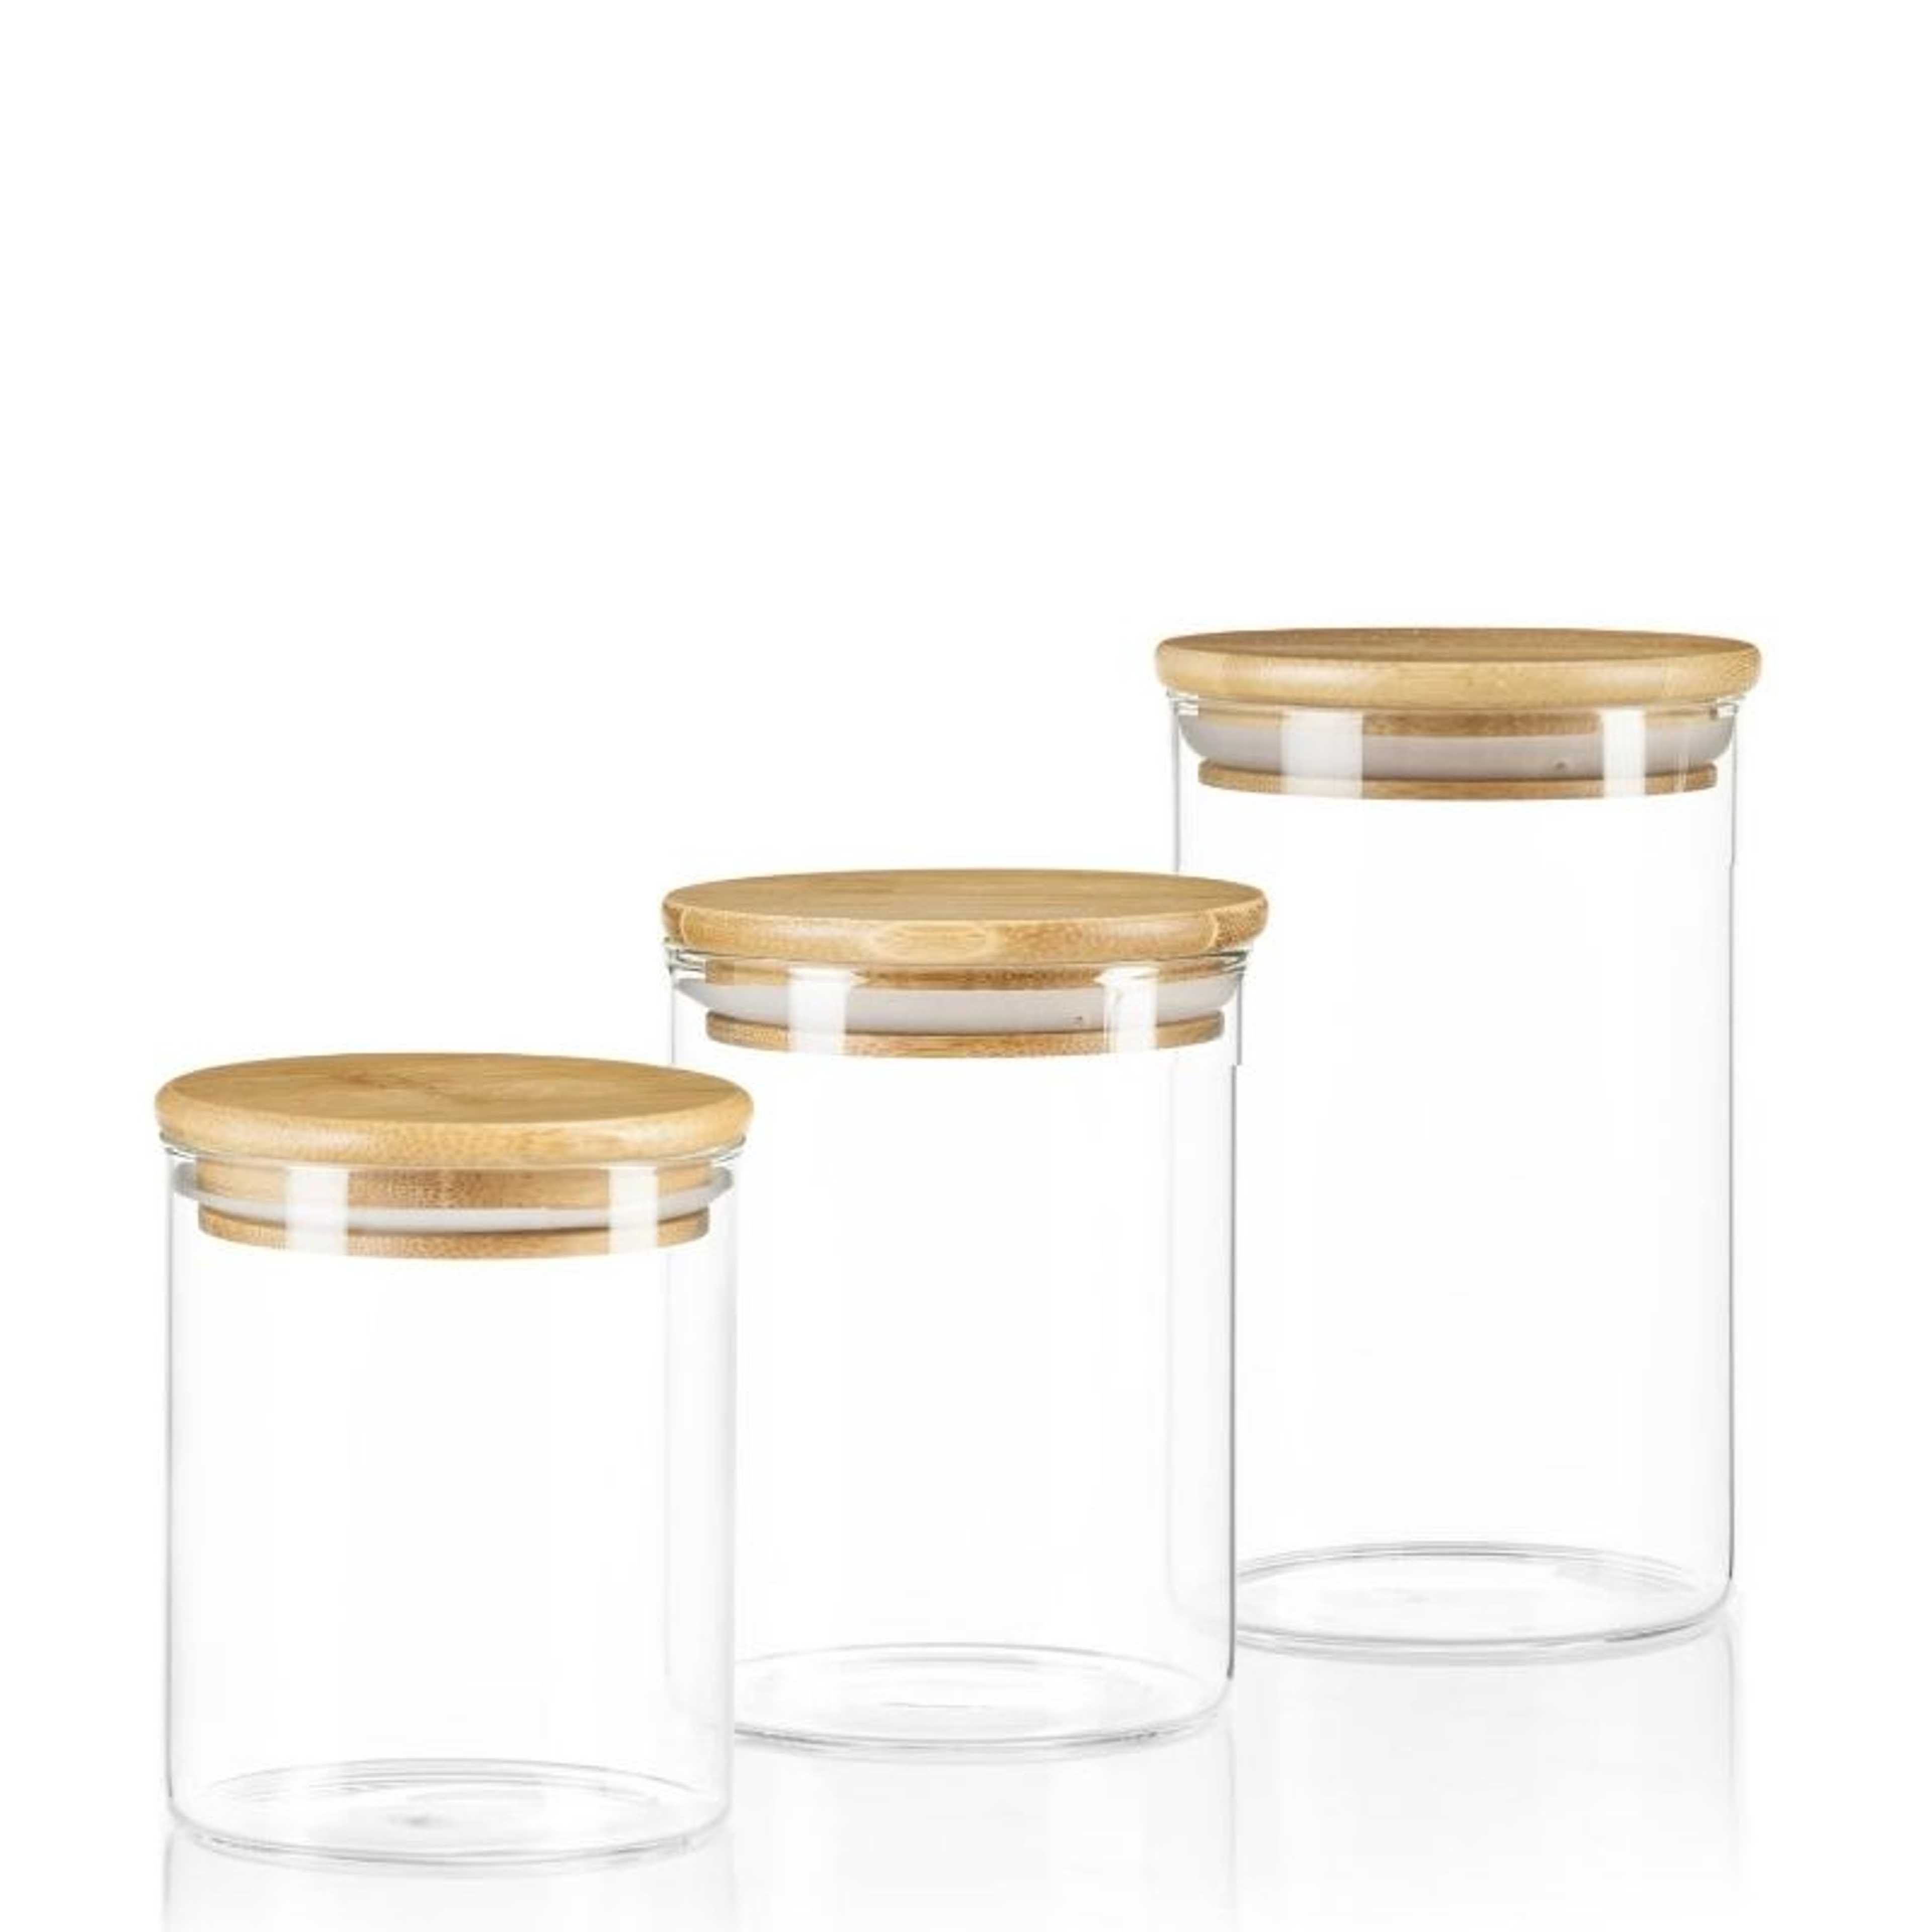 Set of 3 - Glass Kitchen Jars With Wooden Bamboo Lids For Spice/Herbs/Cookies/Pasta/Candies/Stationery/Beads & Small Items